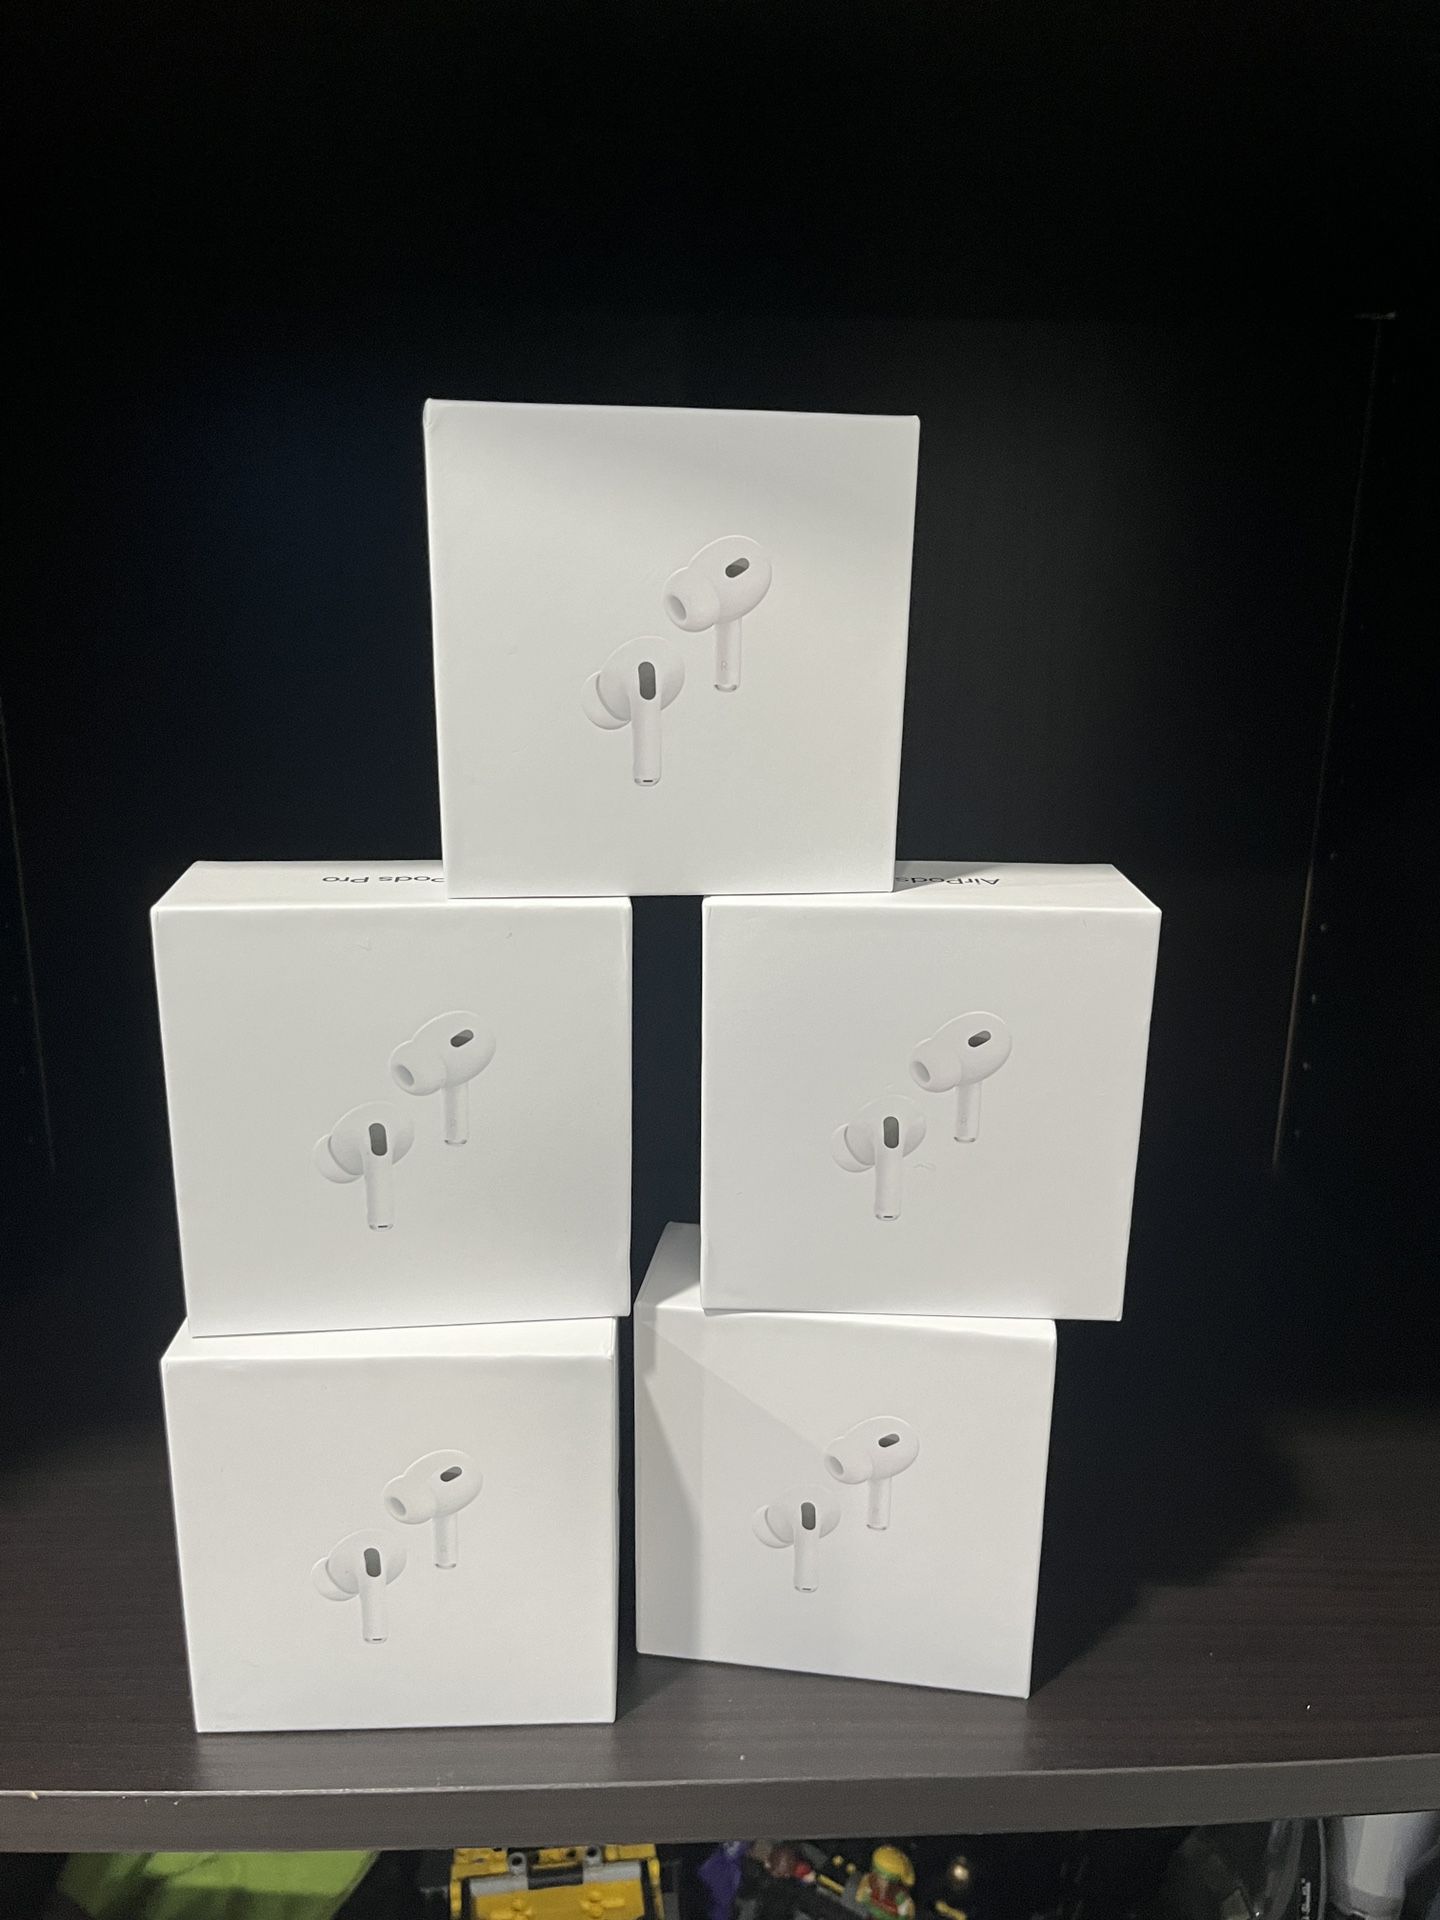 Airpods Pro 2nd Generation *NOT FREE SEND BEST OFFER*